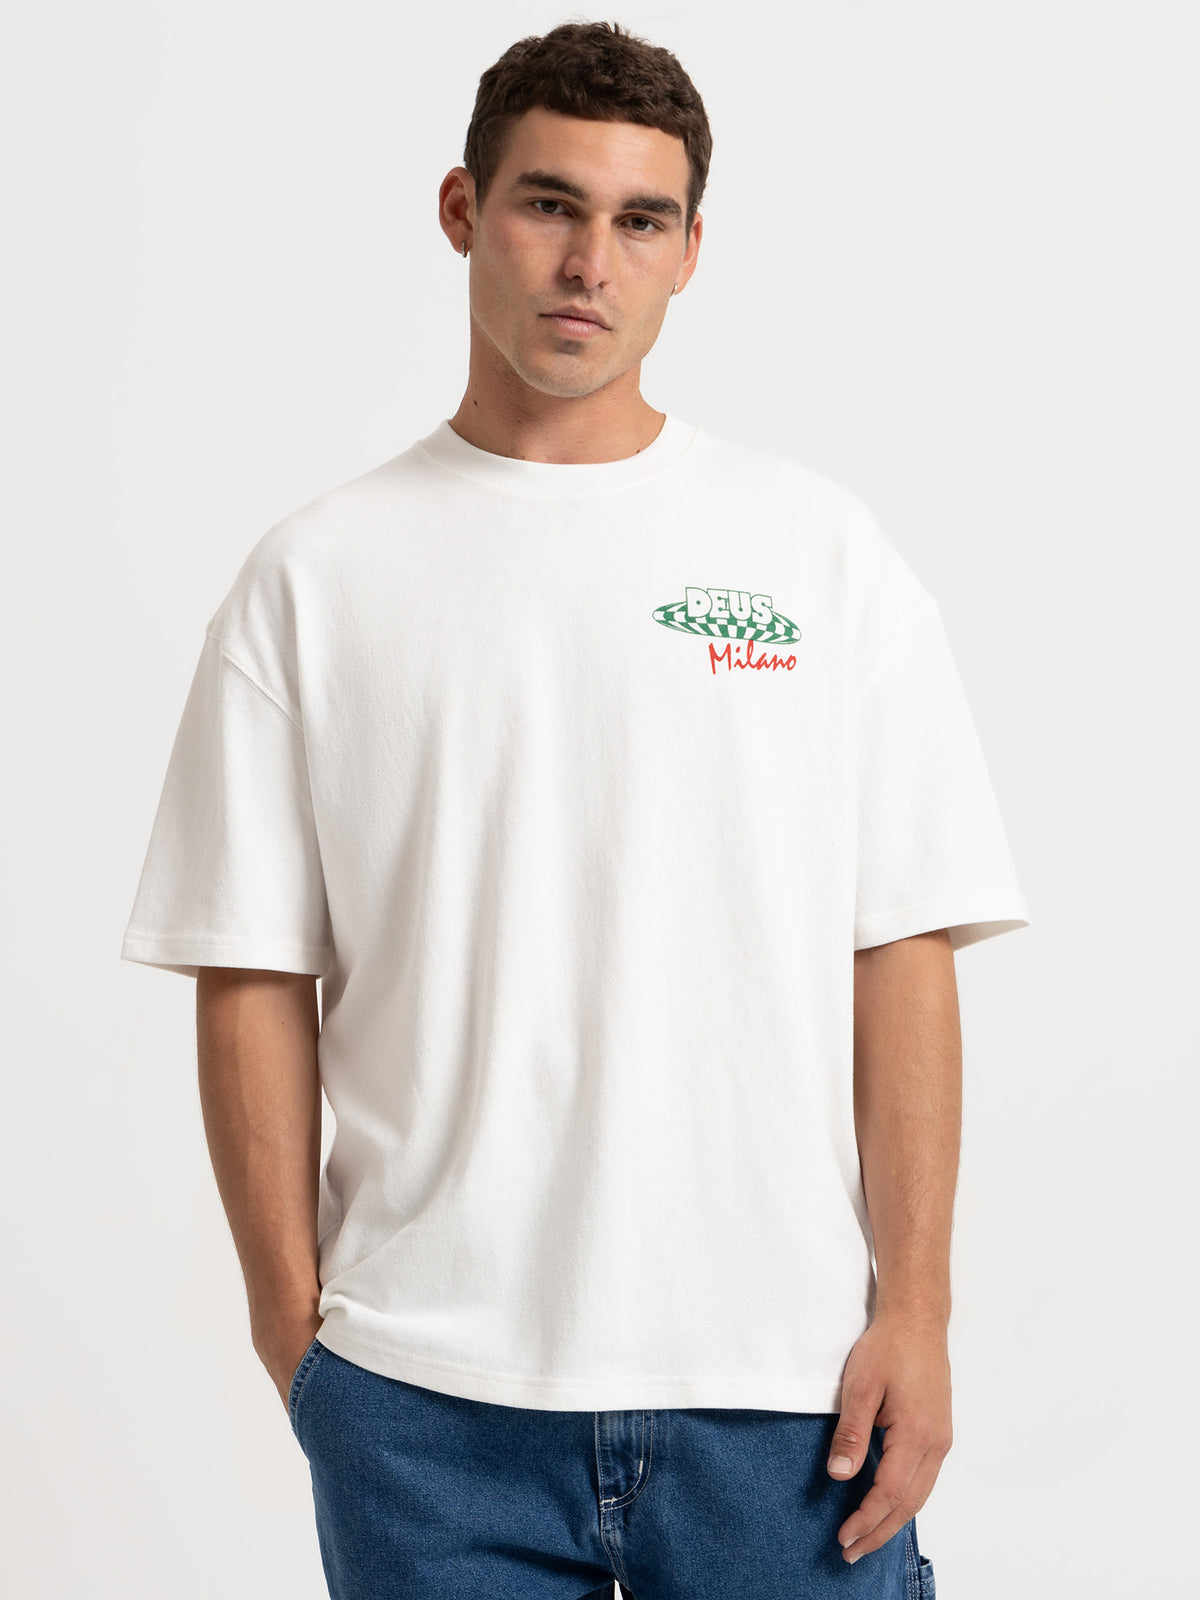 Radicale T-Shirt in White